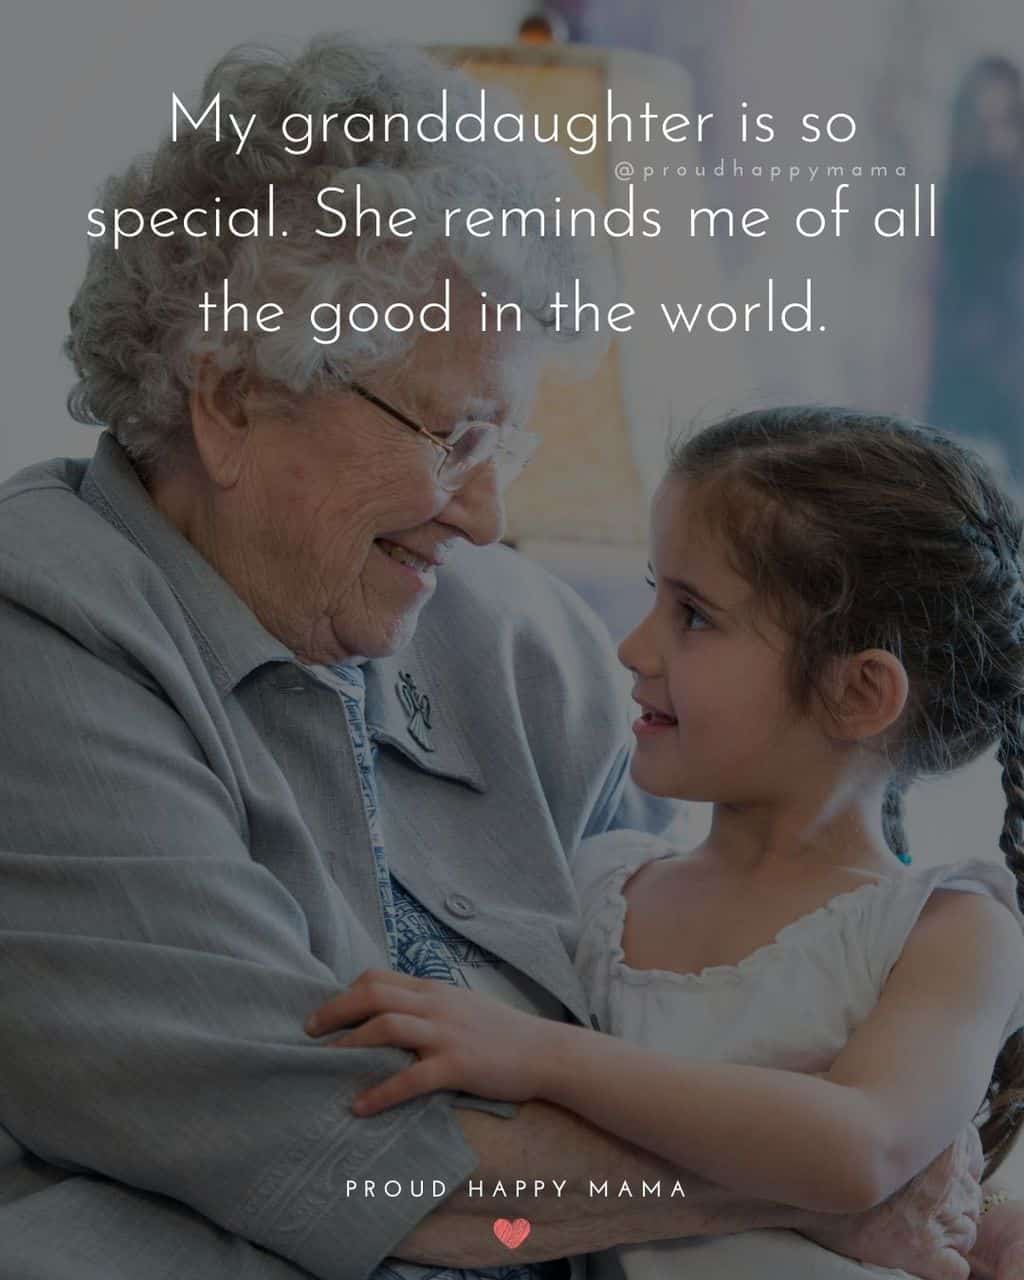 Granddaughter Quotes - My granddaughter is so special. She reminds me of all the good in the world.’